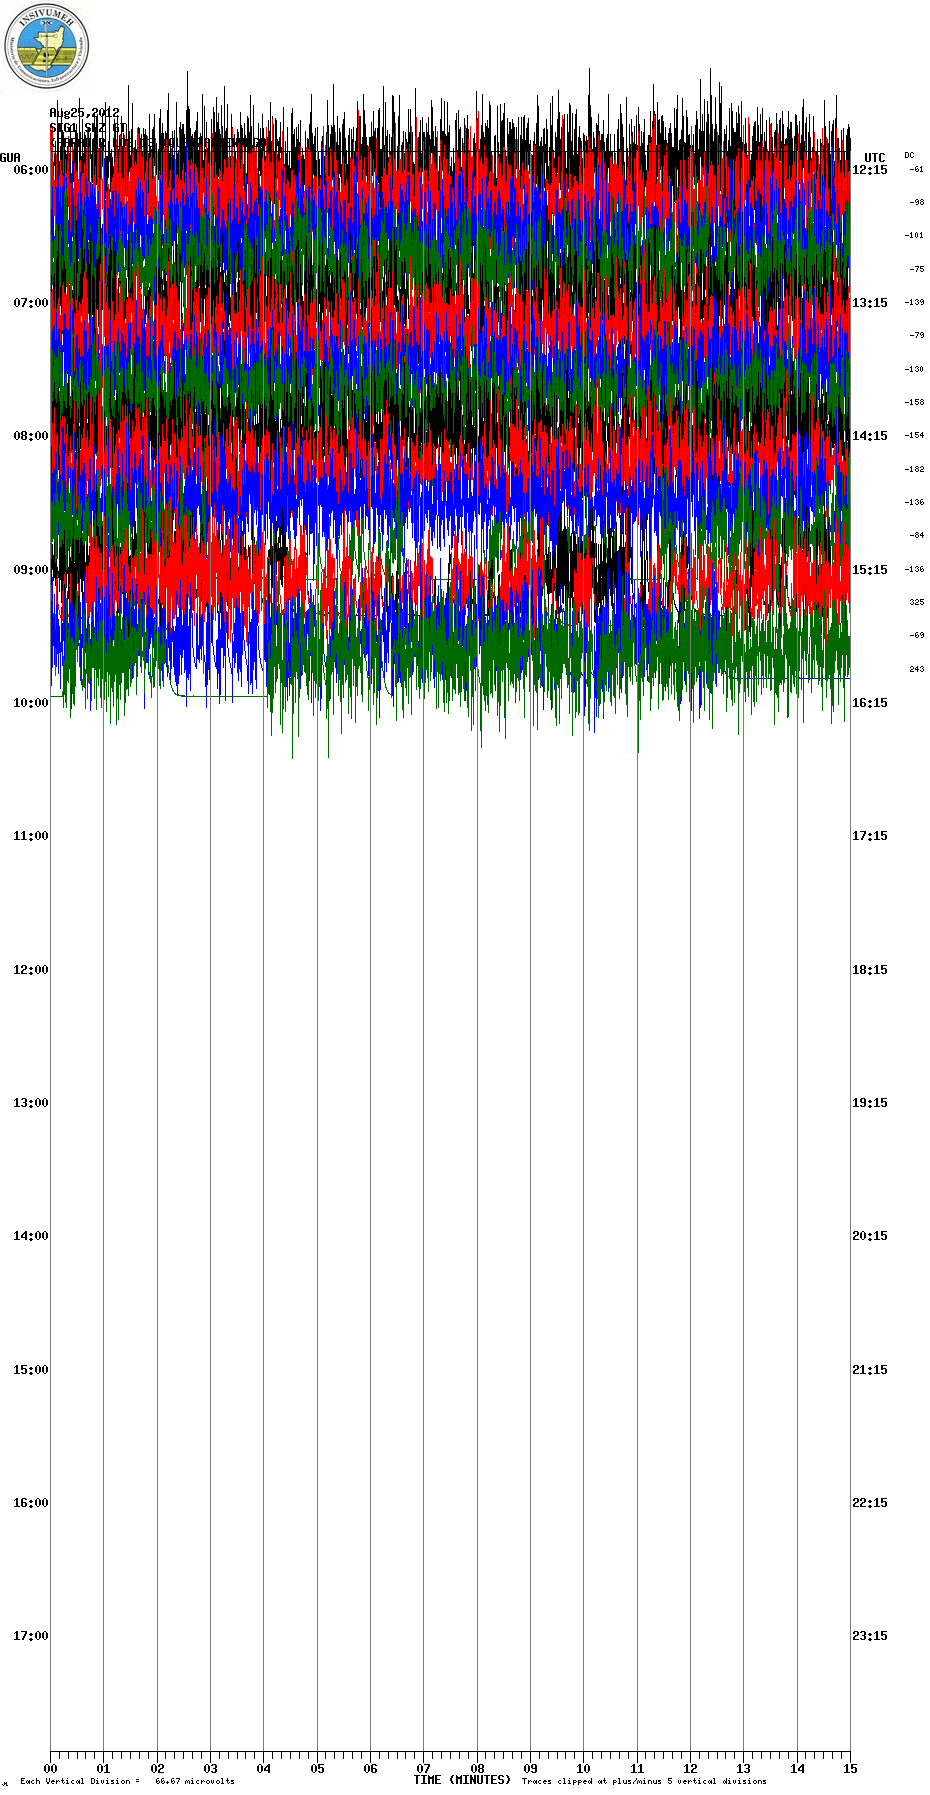 Current seismic signal STG1 station showing near-constant rock falls from the lava flows